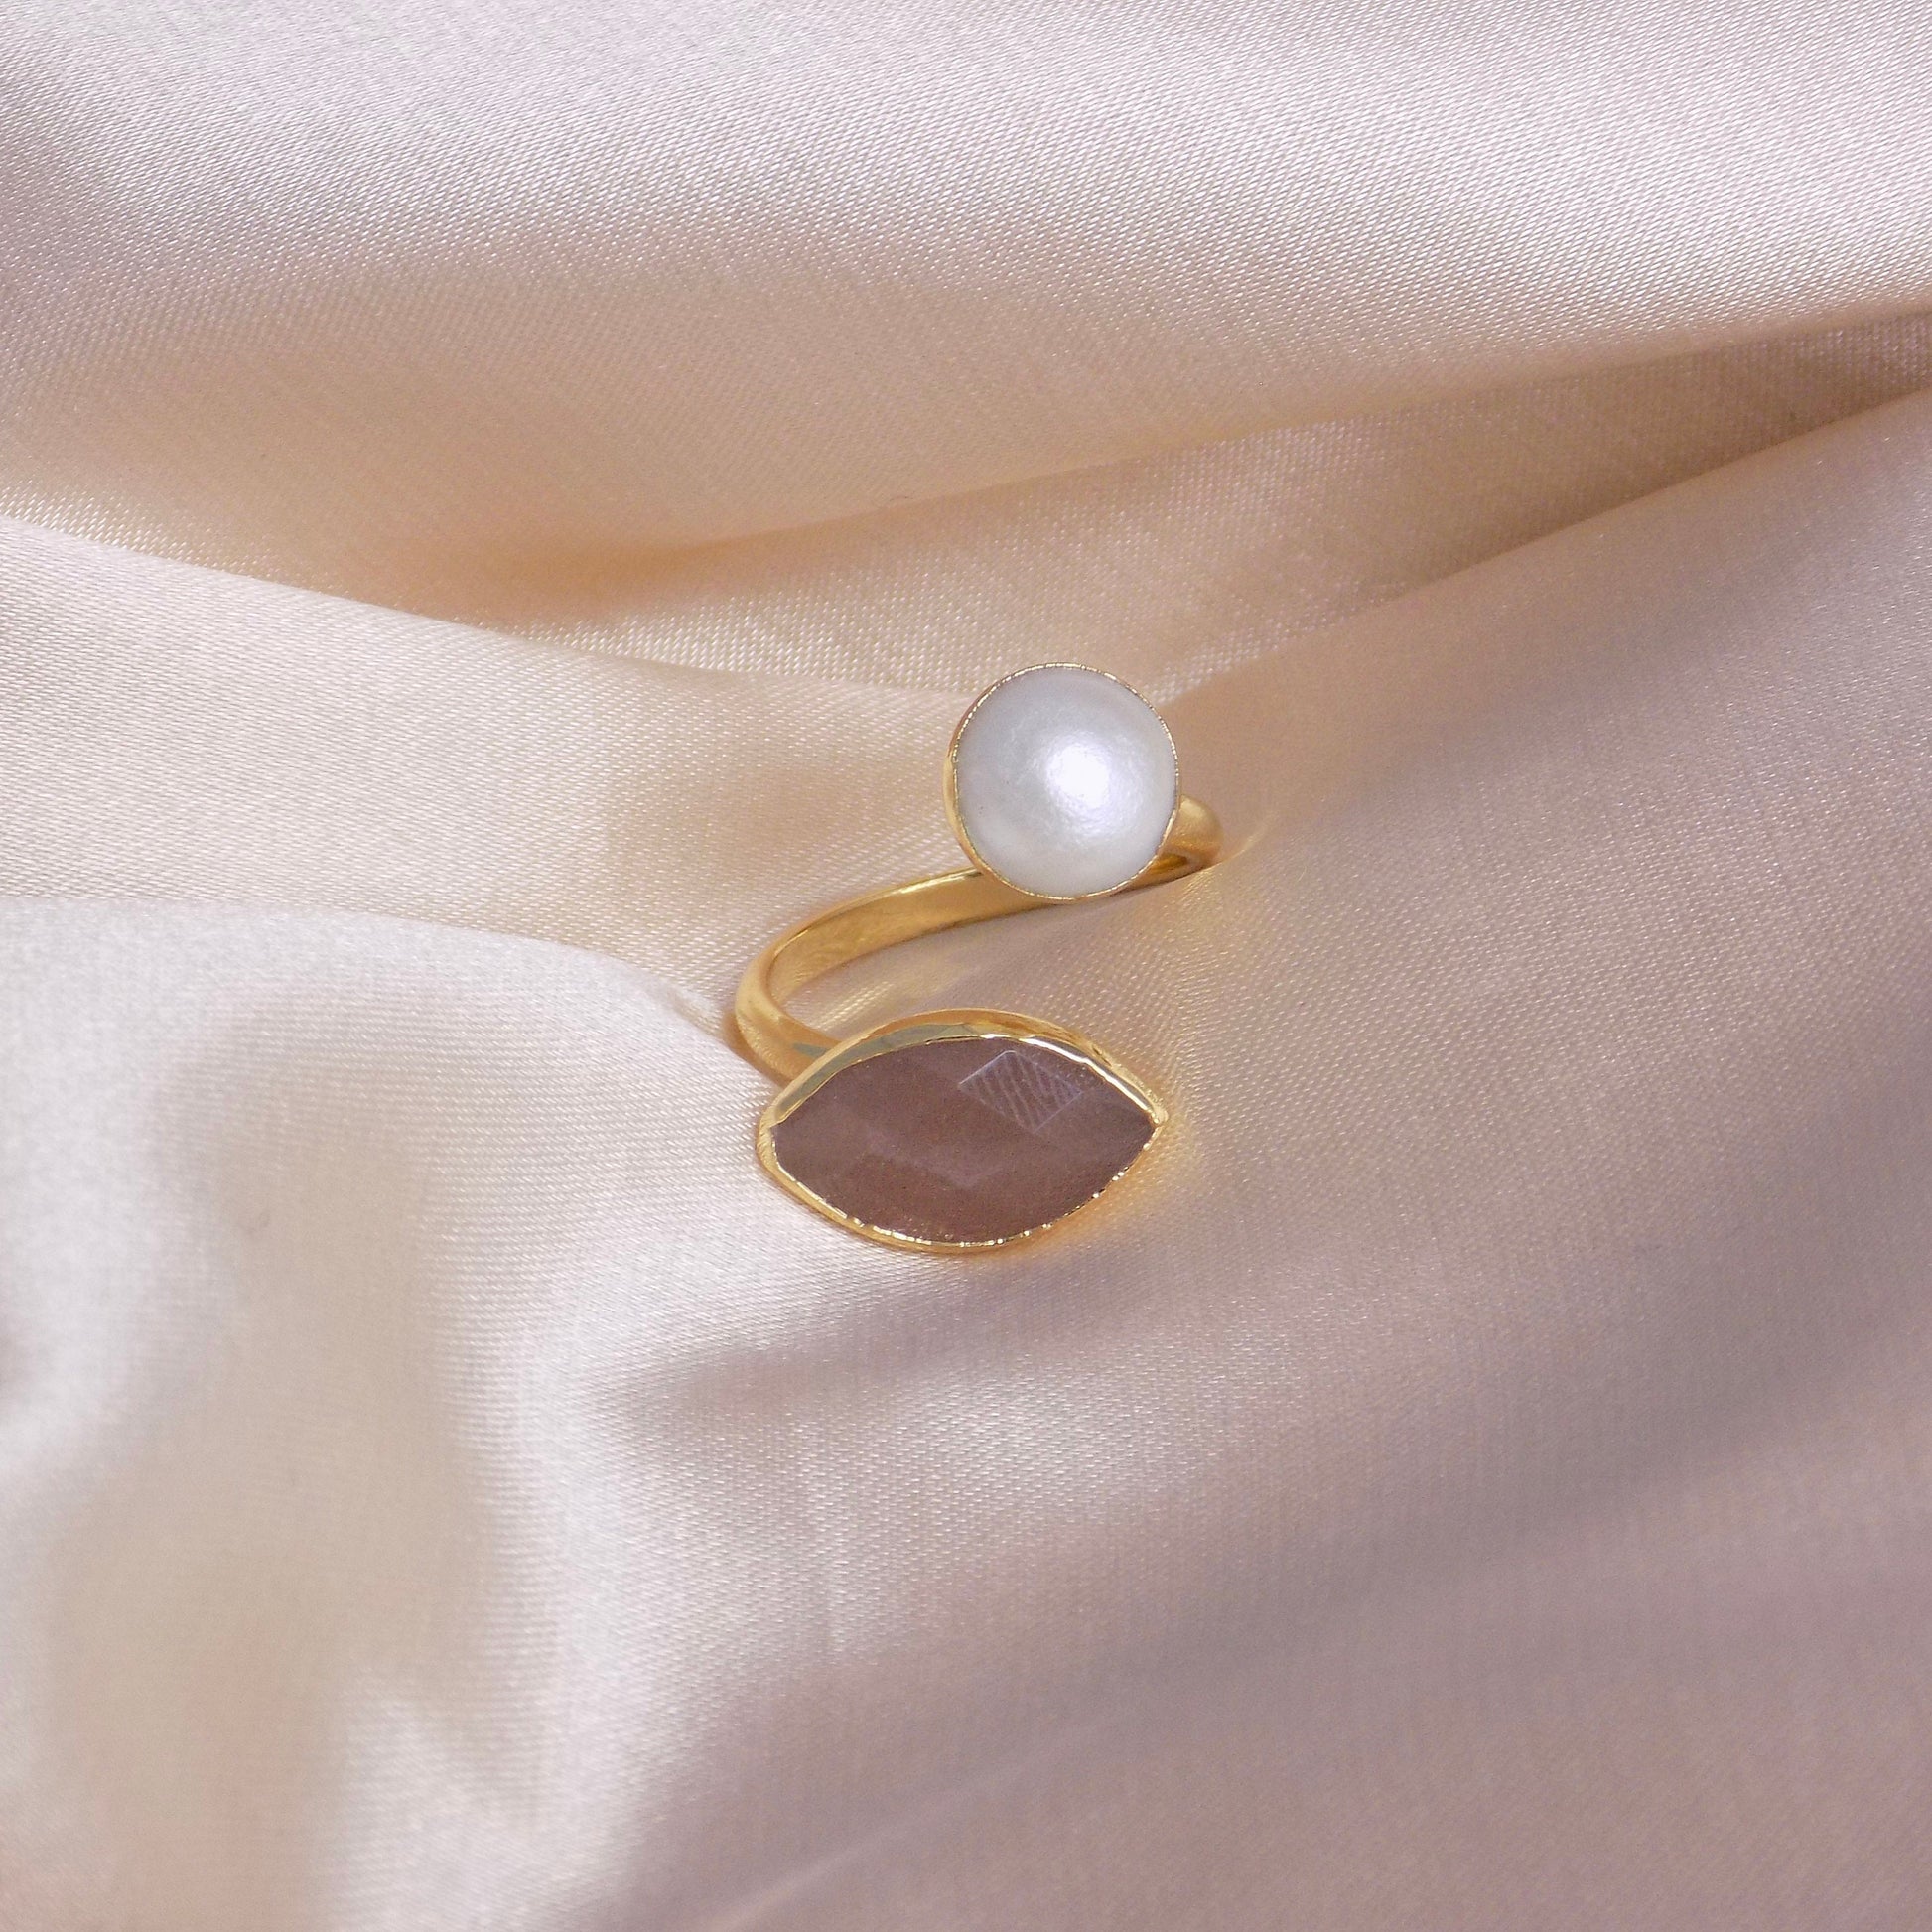 Sunstone And Pearl Multi Stone Ring Gold Plated Adjustable, Mothers Day Gift, M6-781